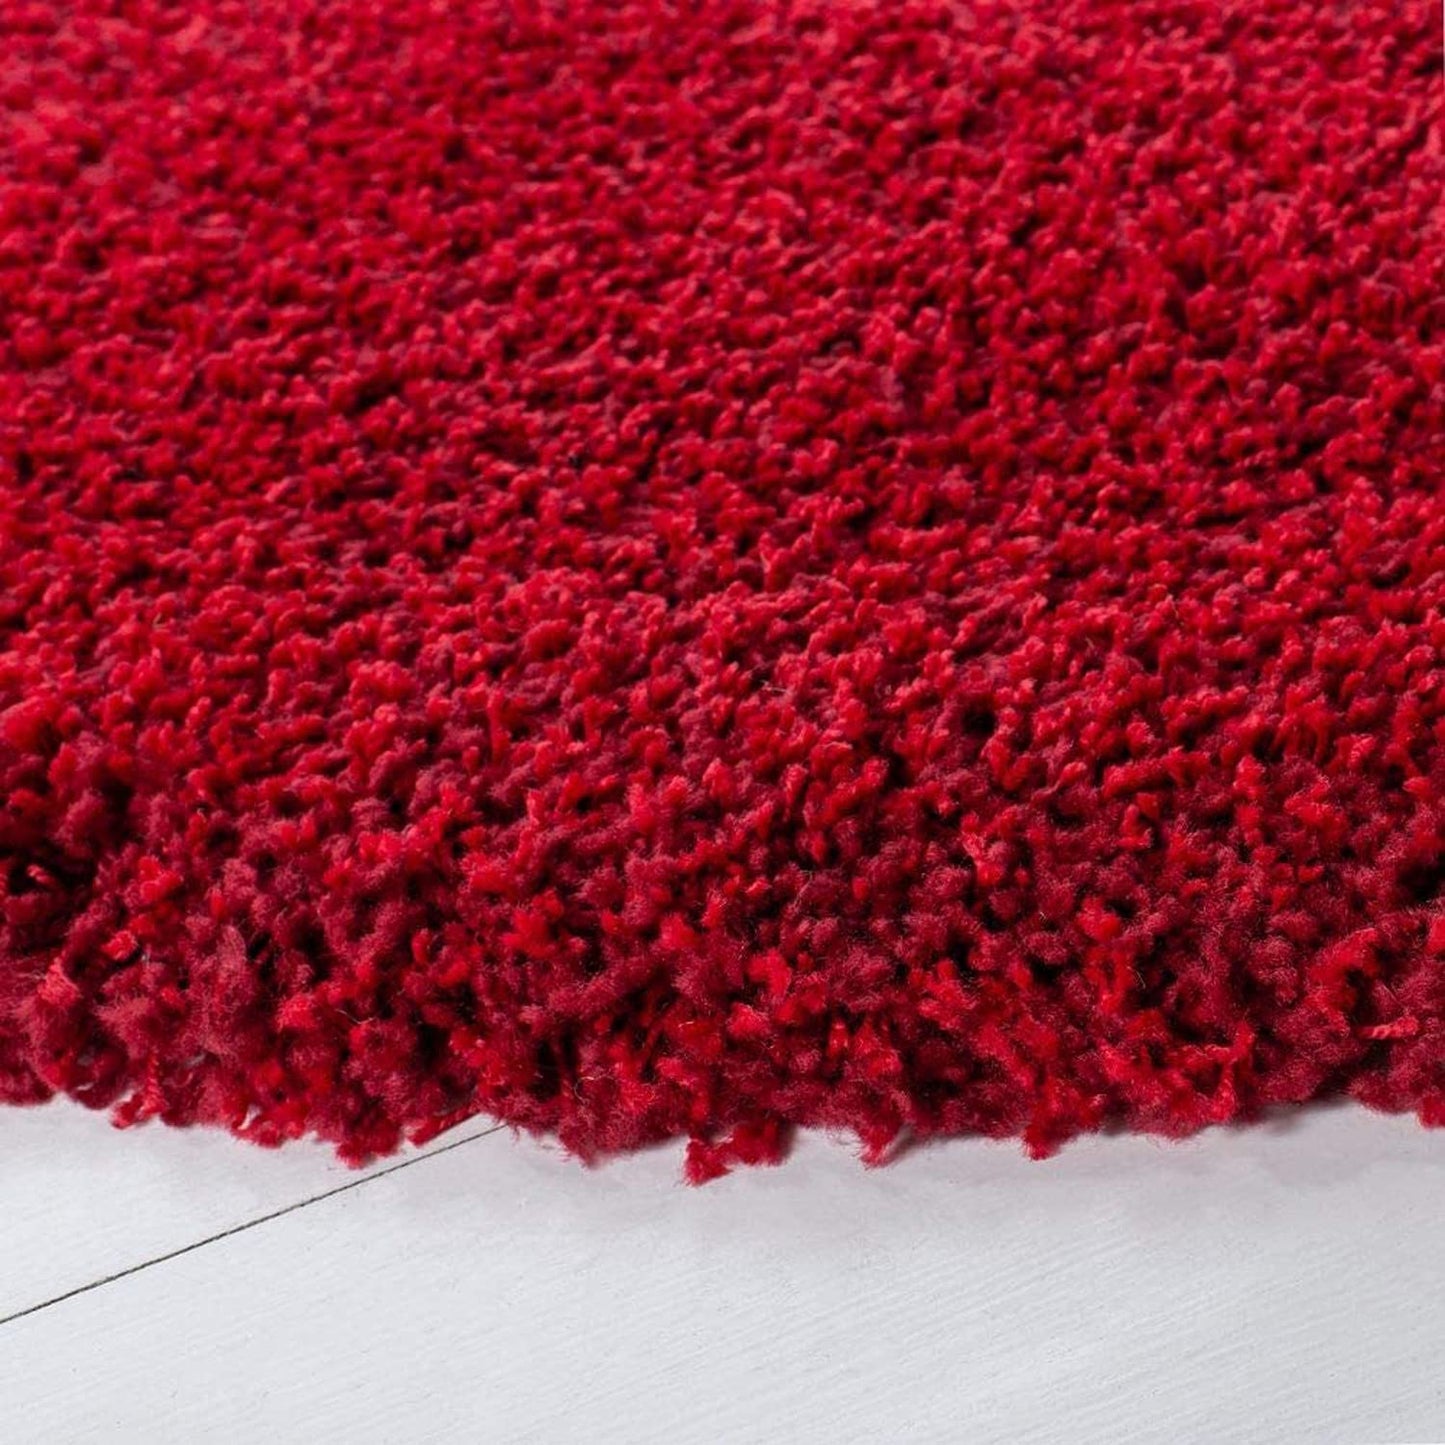 Kashyapa Rugs Collection - Luxury Red with Blue Modern Handmade Carpet for Living Room Bedroom and Hall Shaggy Rug